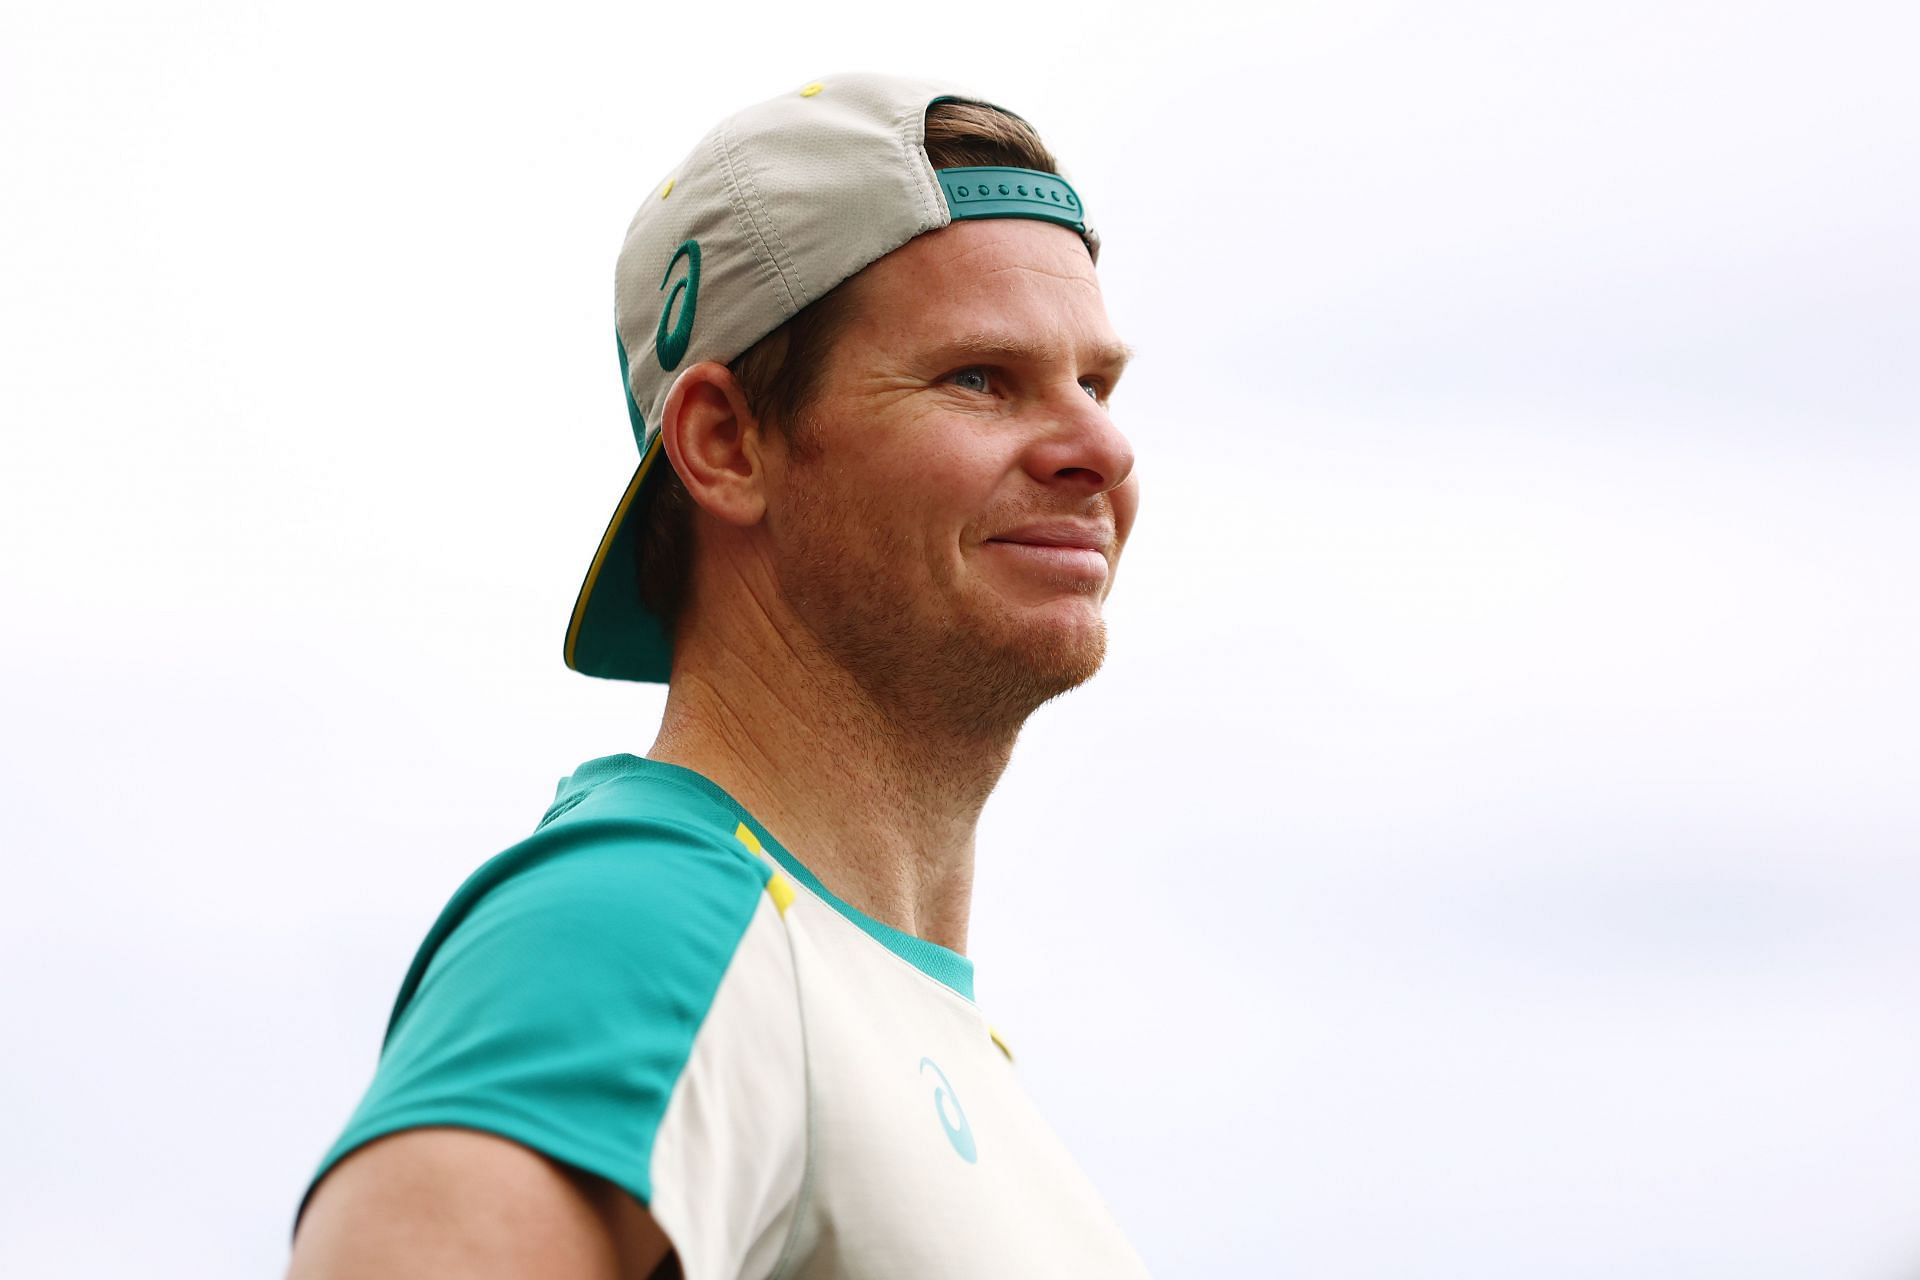 Steve Smith has a T20I career strike rate of 126.12. (Credits: Getty)